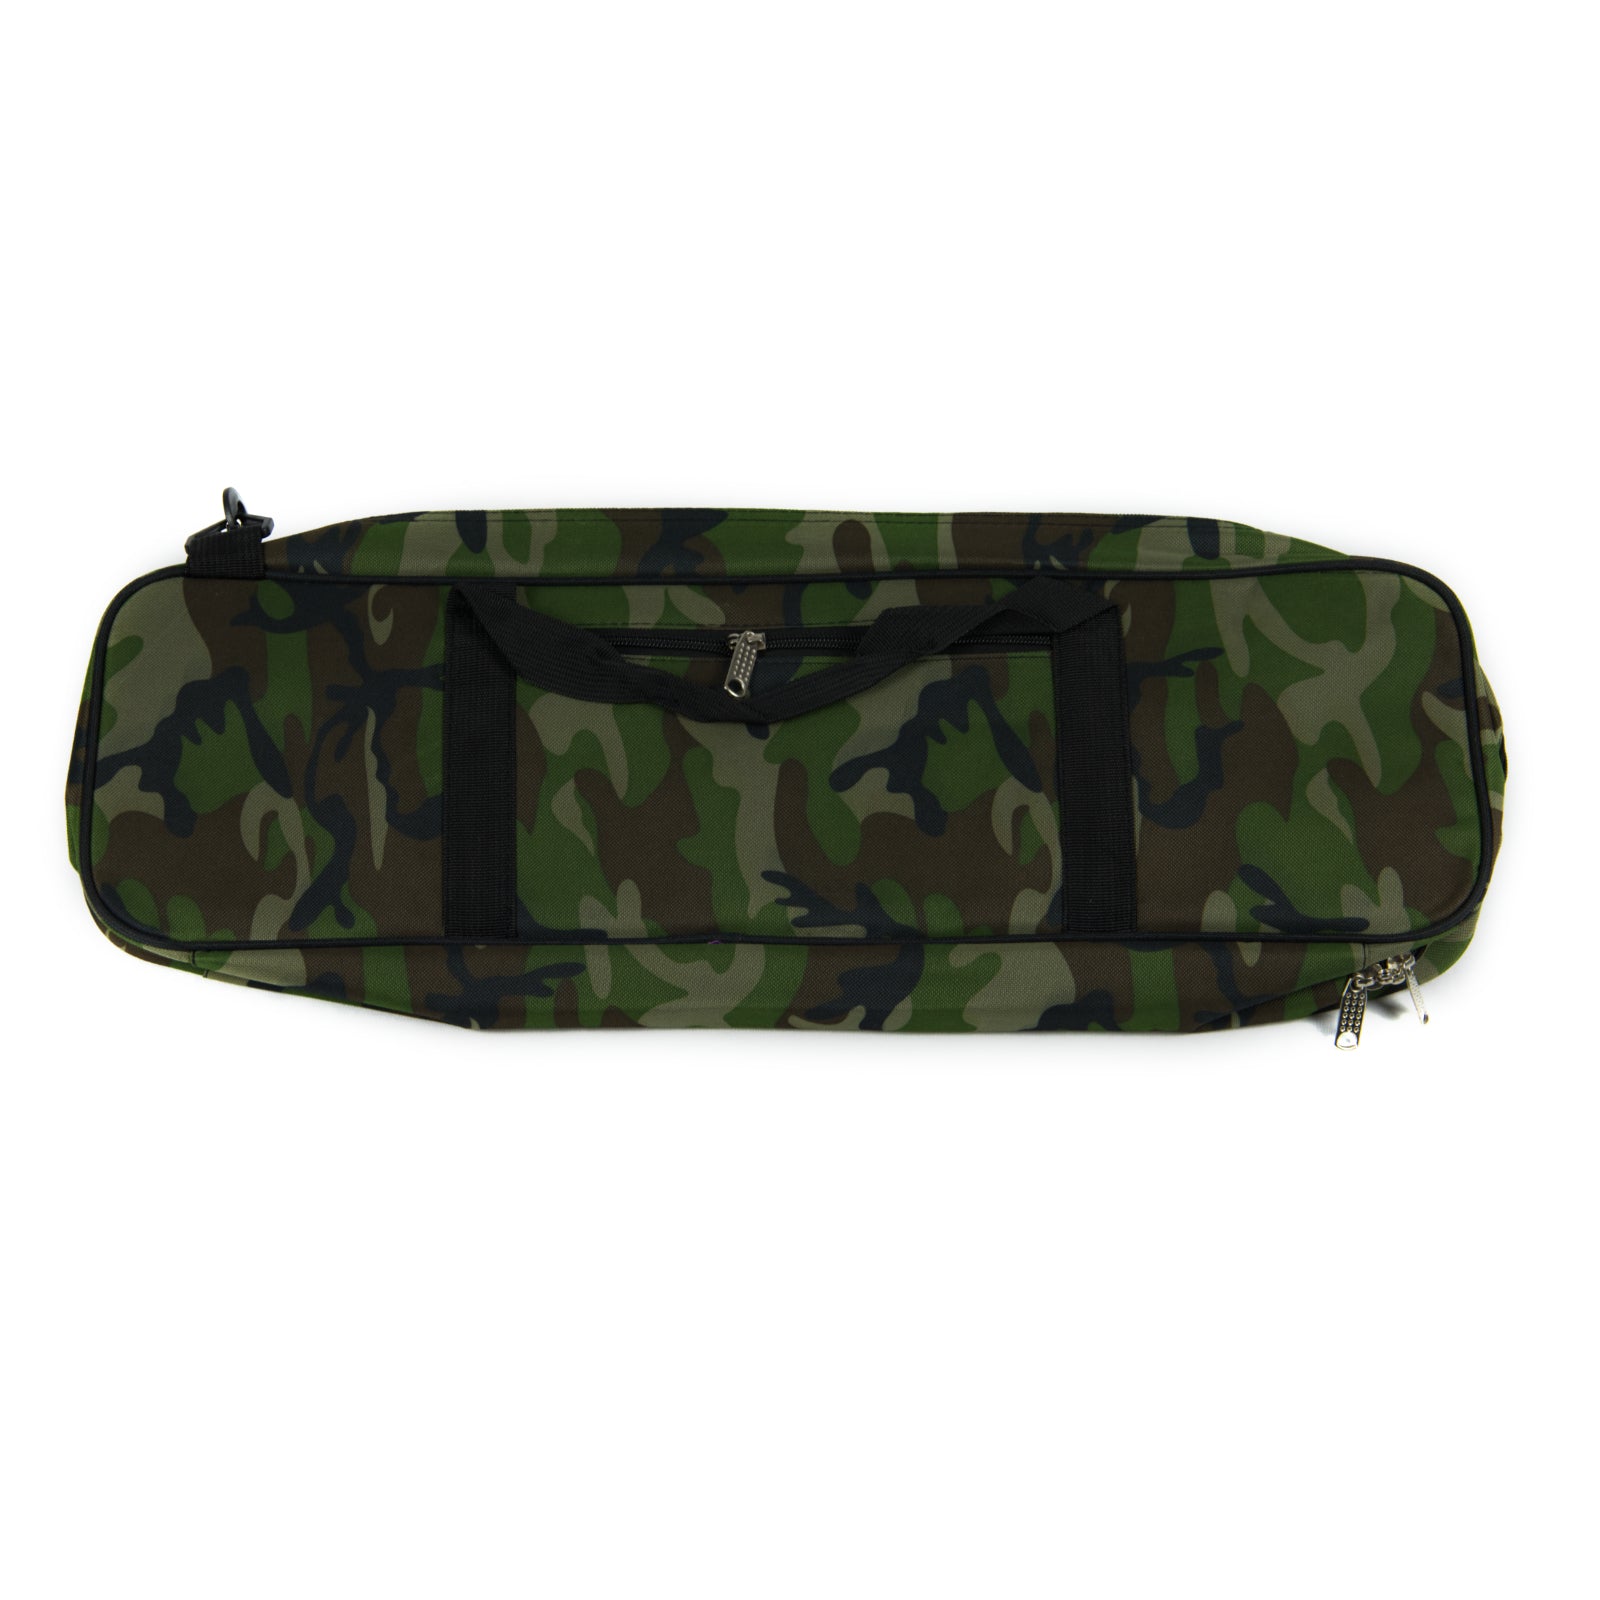 Deluxe Carry All Chess Bag - Green Camo